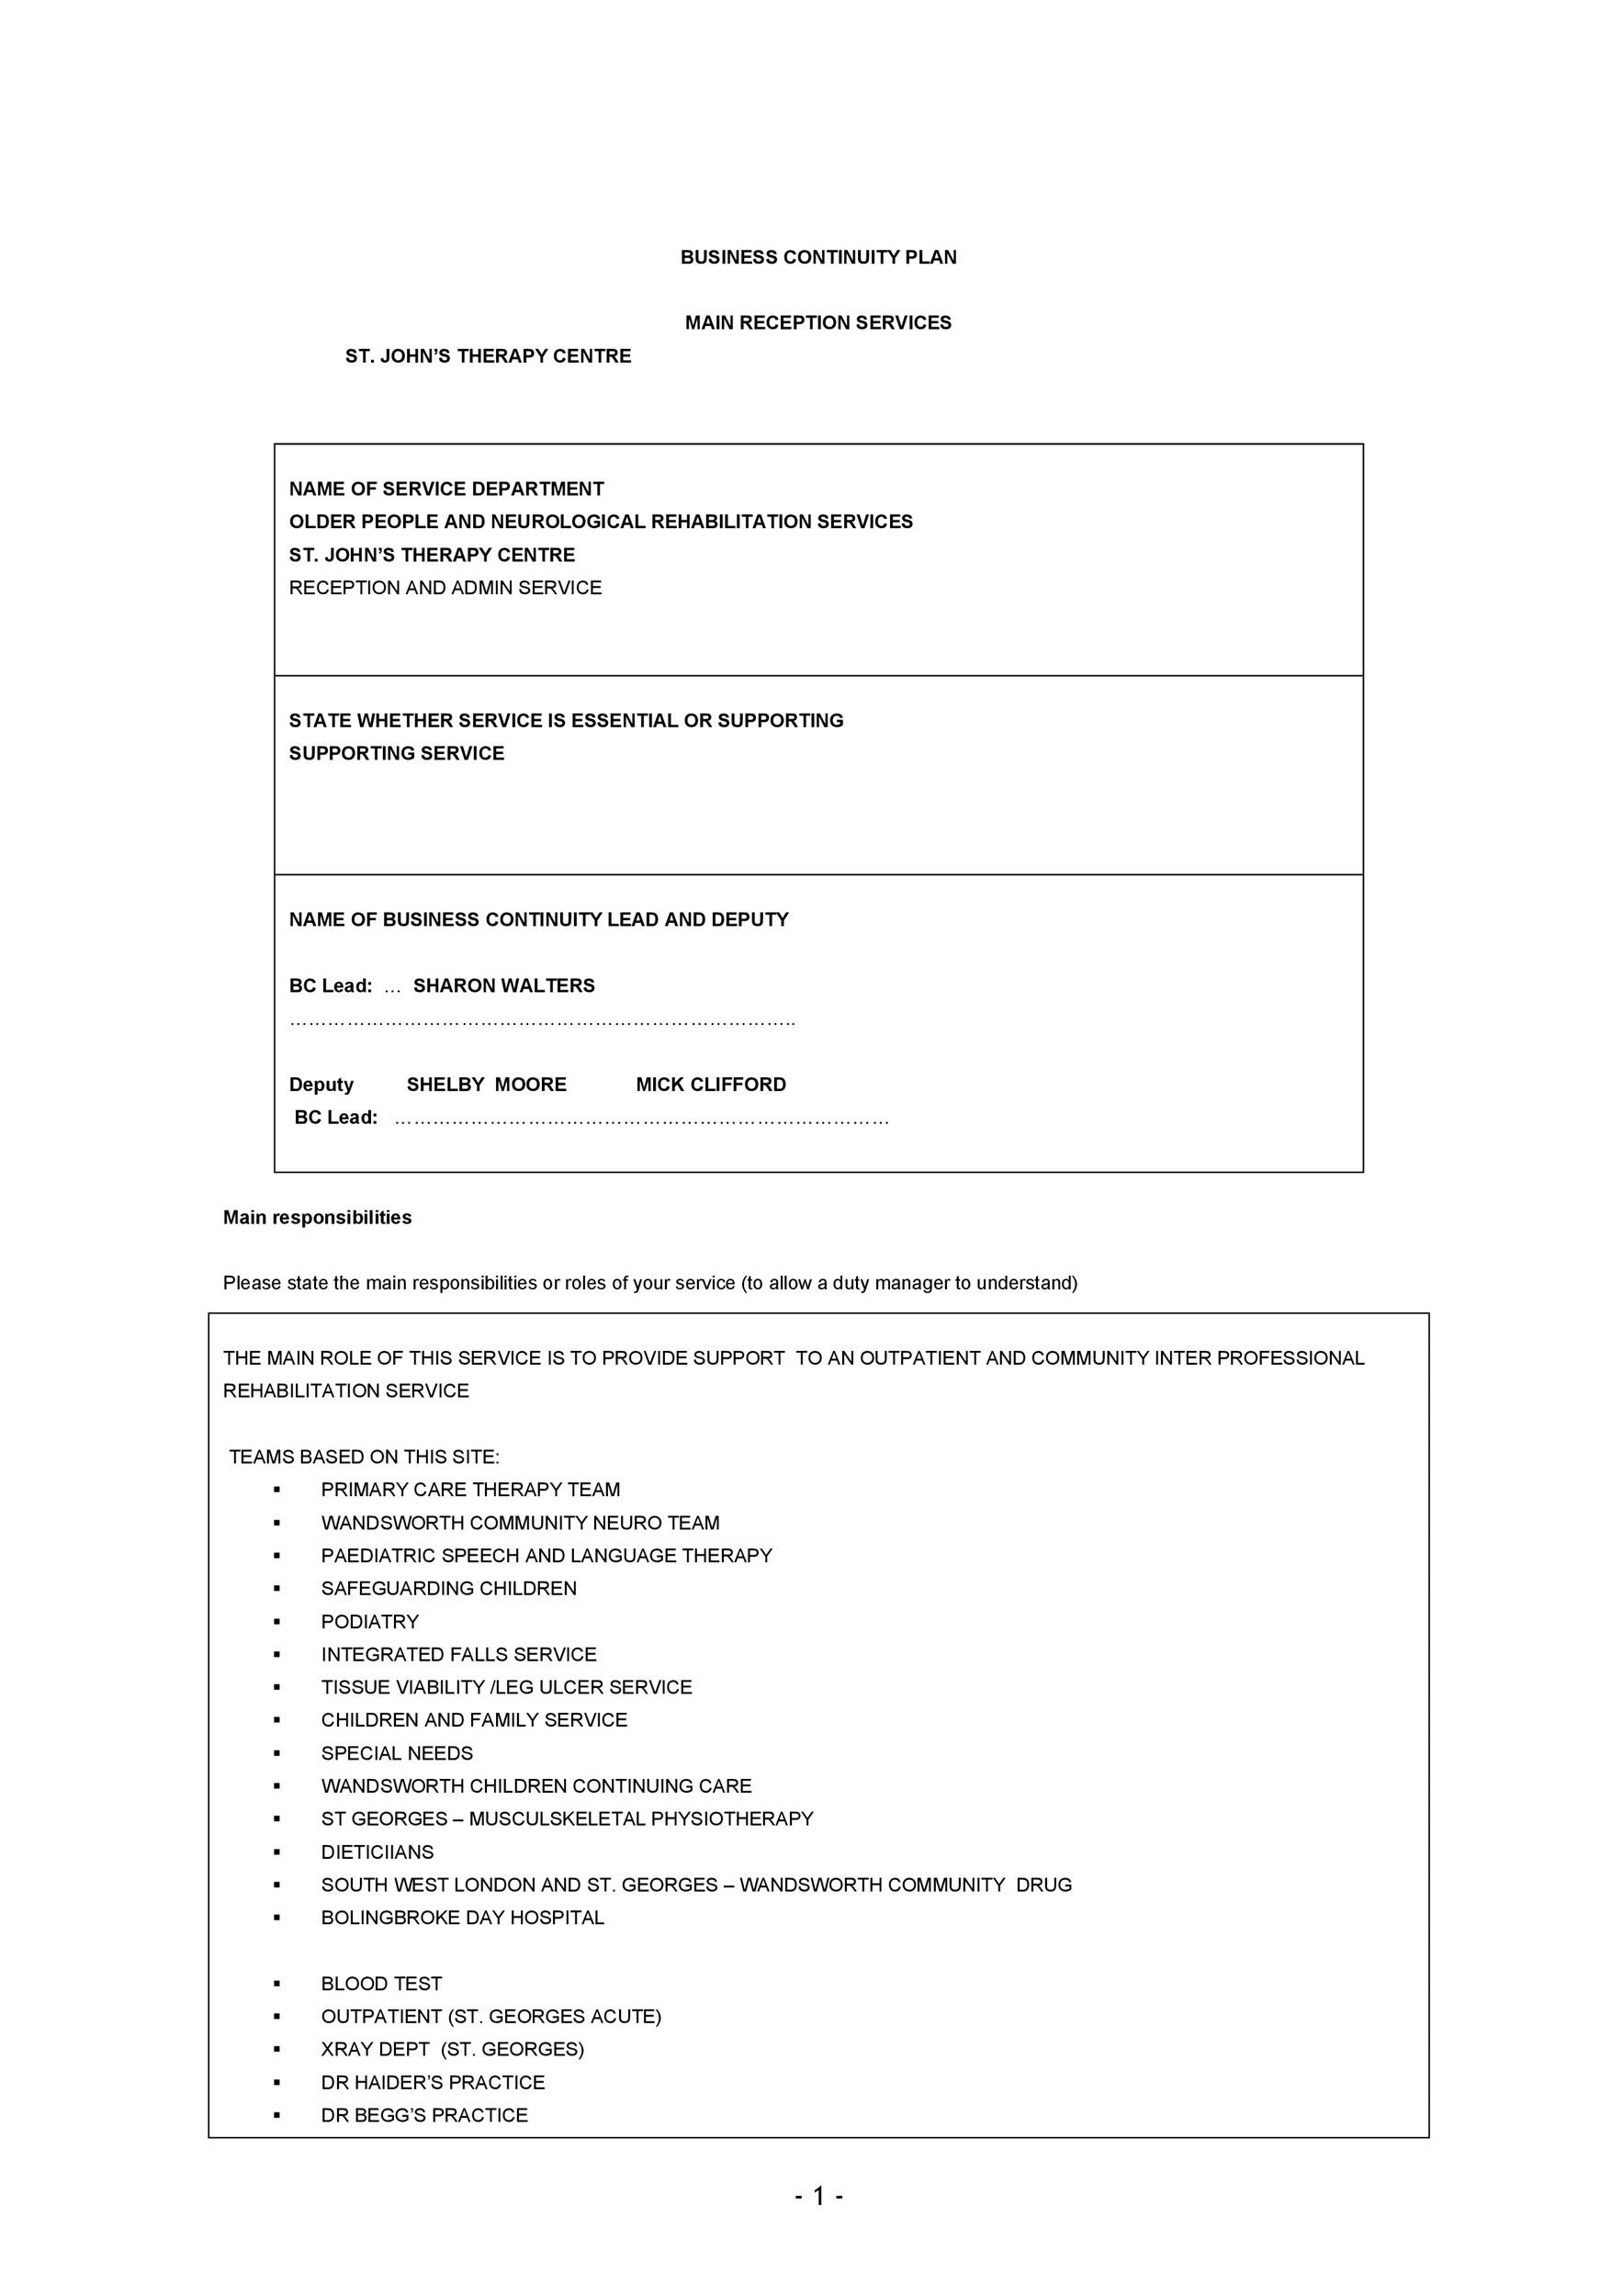 Free contingency plan template 02